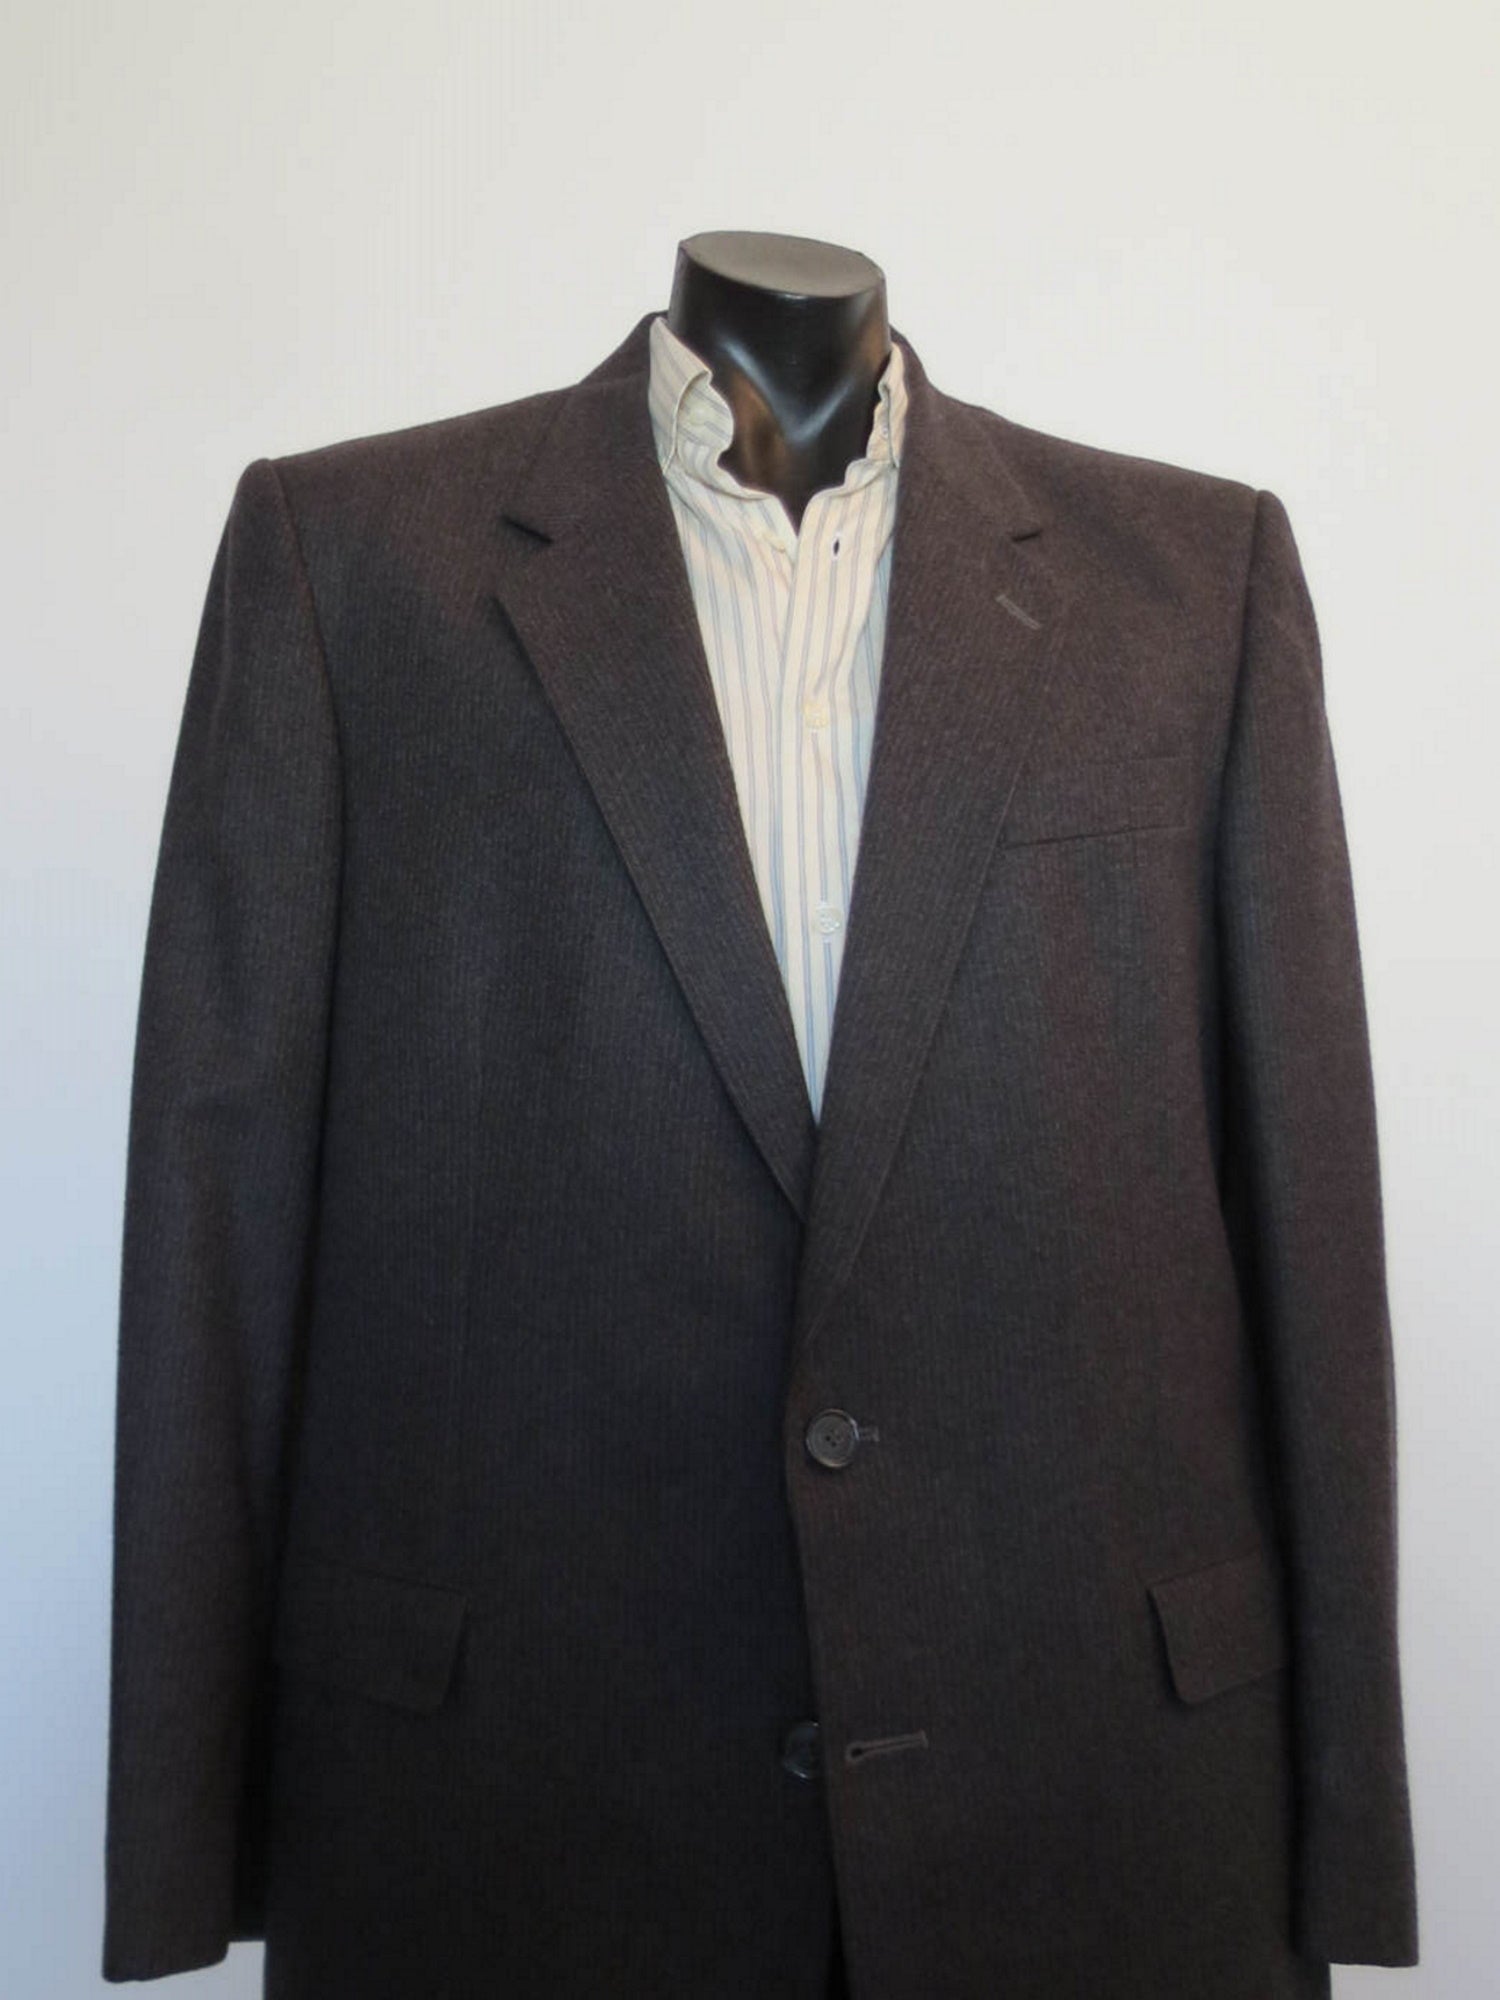 1980s 1990s vintage retro charcoal grey pinstriped wool jacket by tres bon